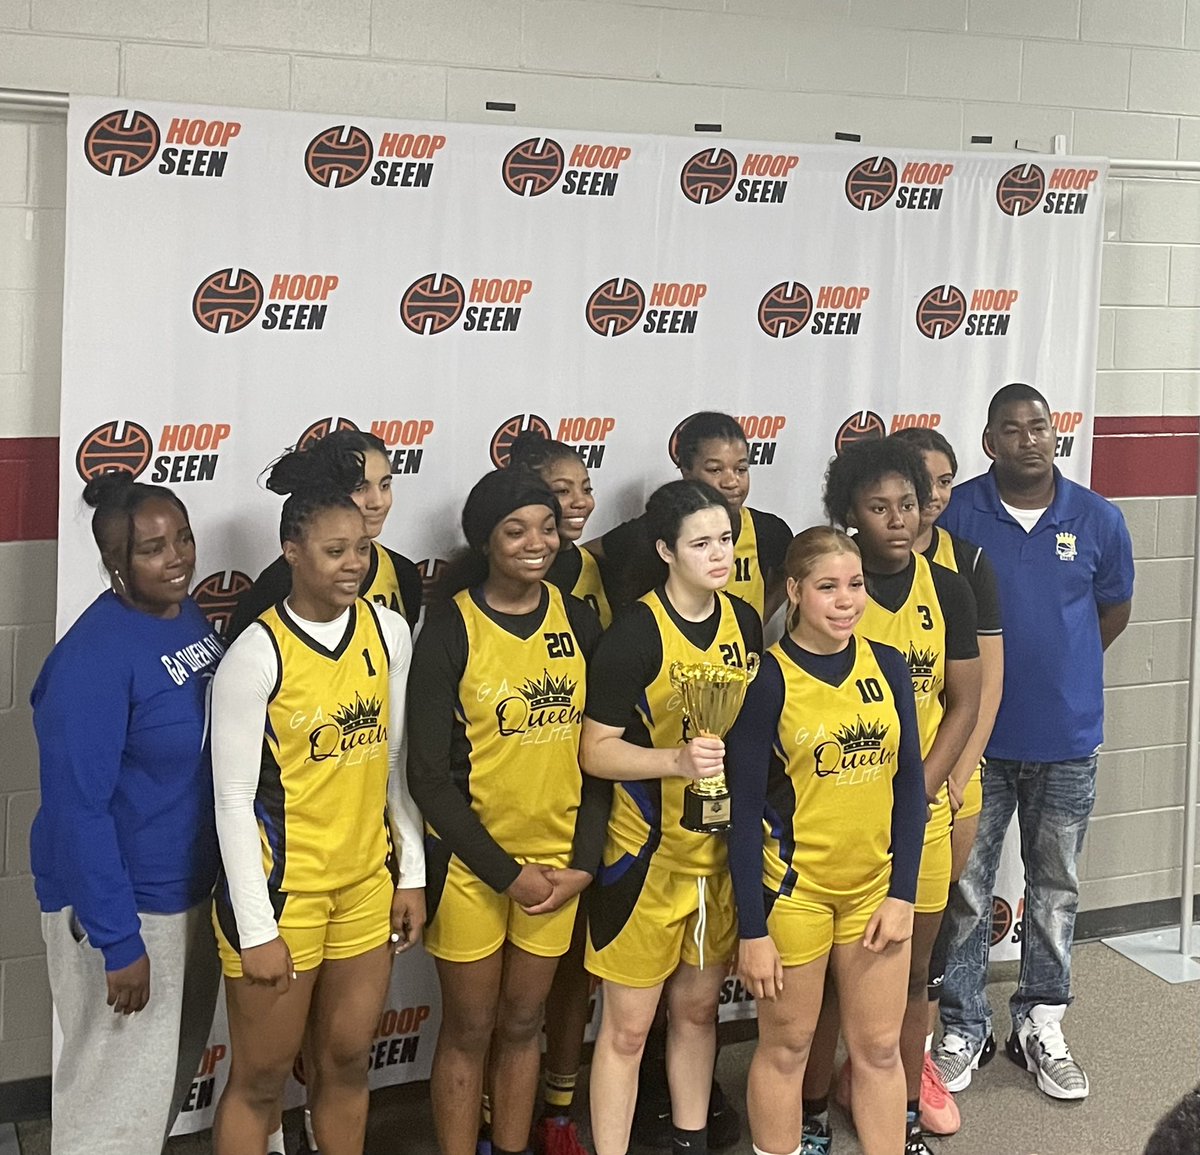 JV Girls #GACup II Championship: GA Queen Elite Black def. T2G, 54-35. Montana Jenkins had 15 points, including four 3’s, leading a balanced attack for GA Elite Queens. Leah Pollack had 13 points for T2G in the loss.